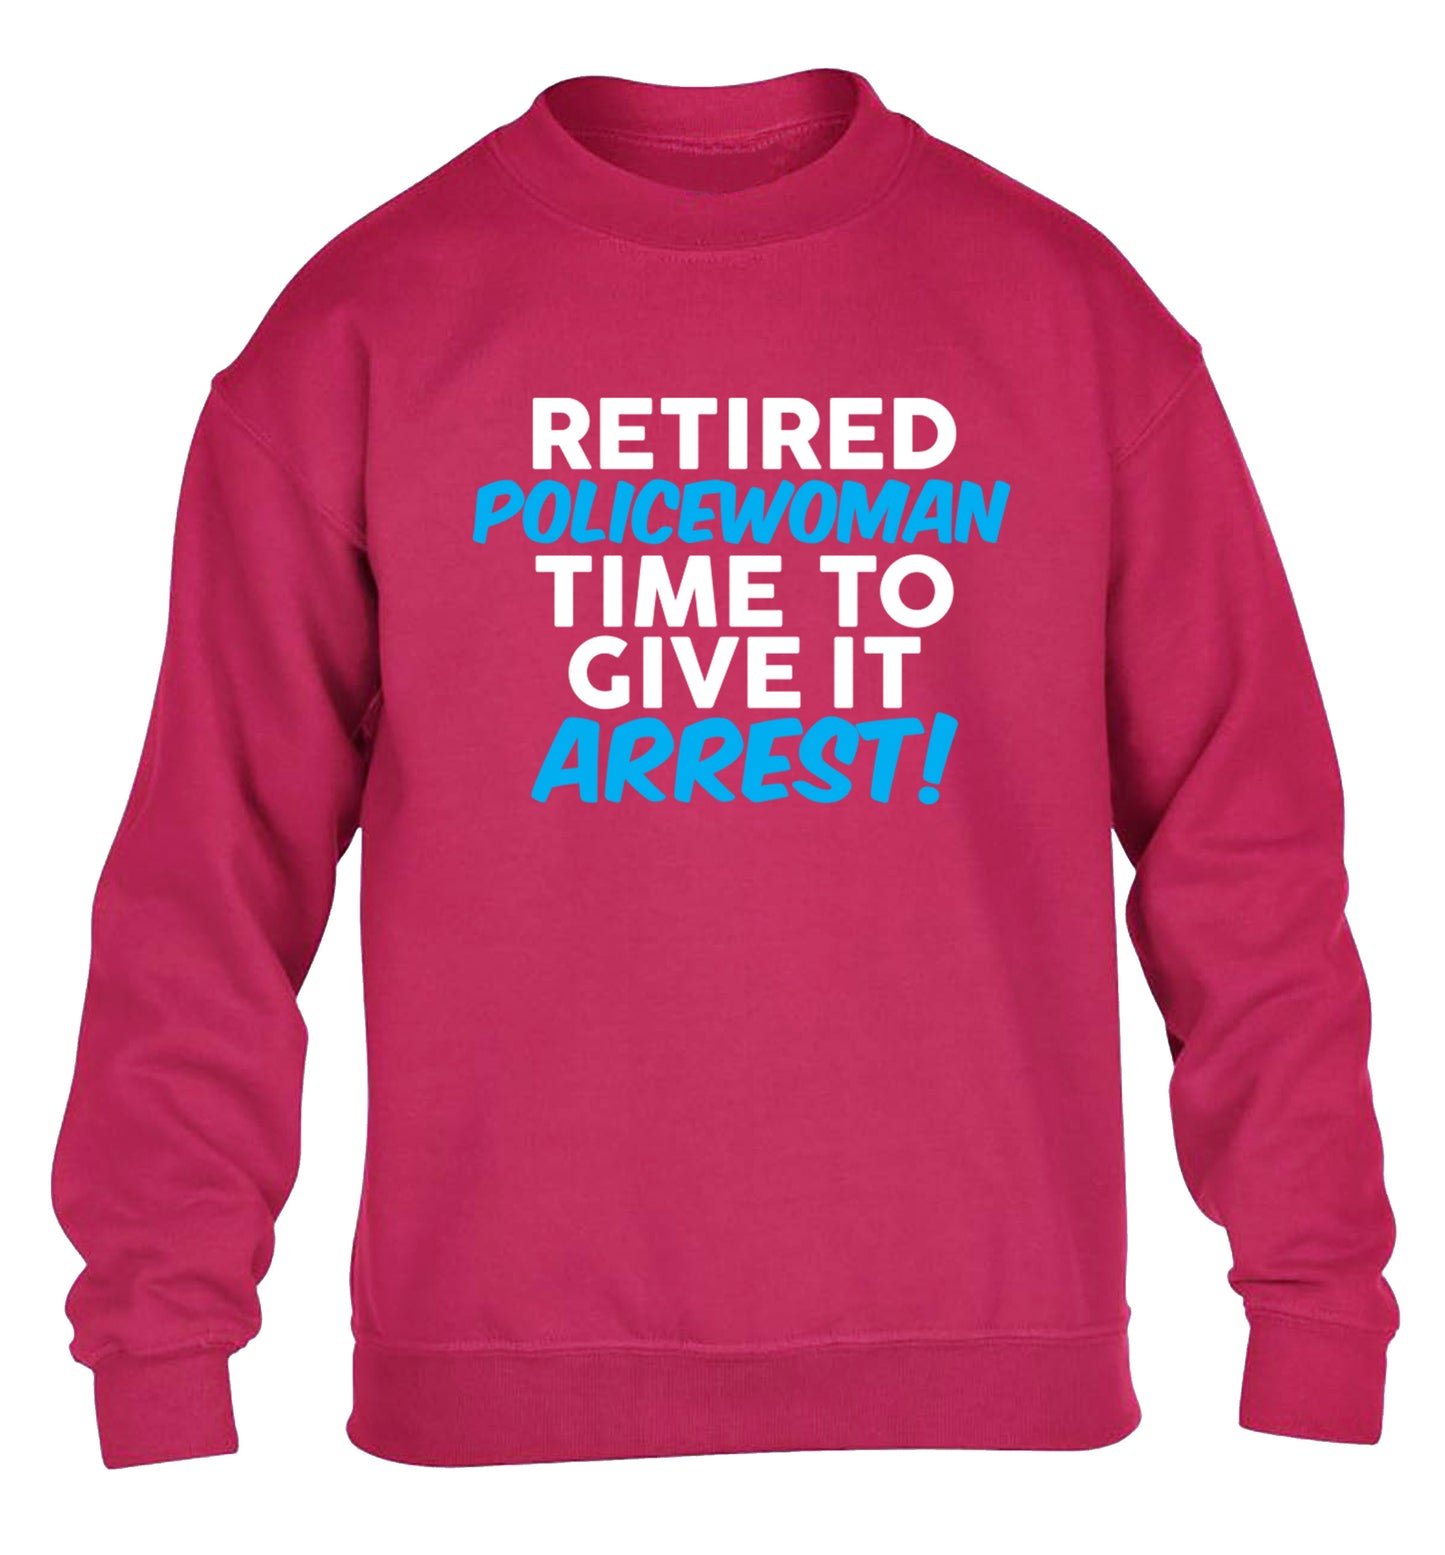 Retired policewoman time to give it arrest children's pink sweater 12-13 Years